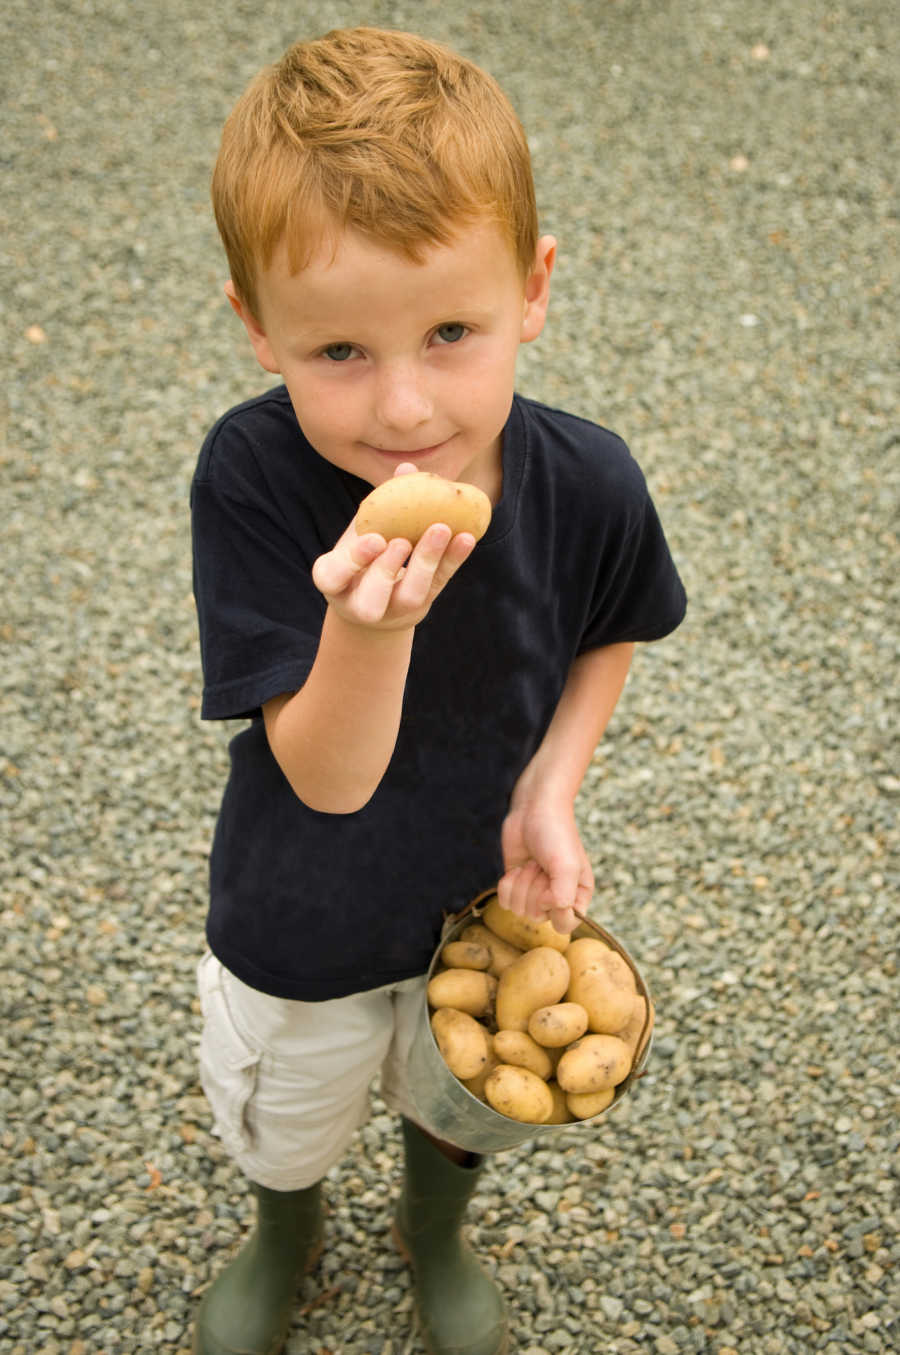 Toddler boy holding a bucket of potatoes in one hand and a single potato in the other as parents teach him lesson